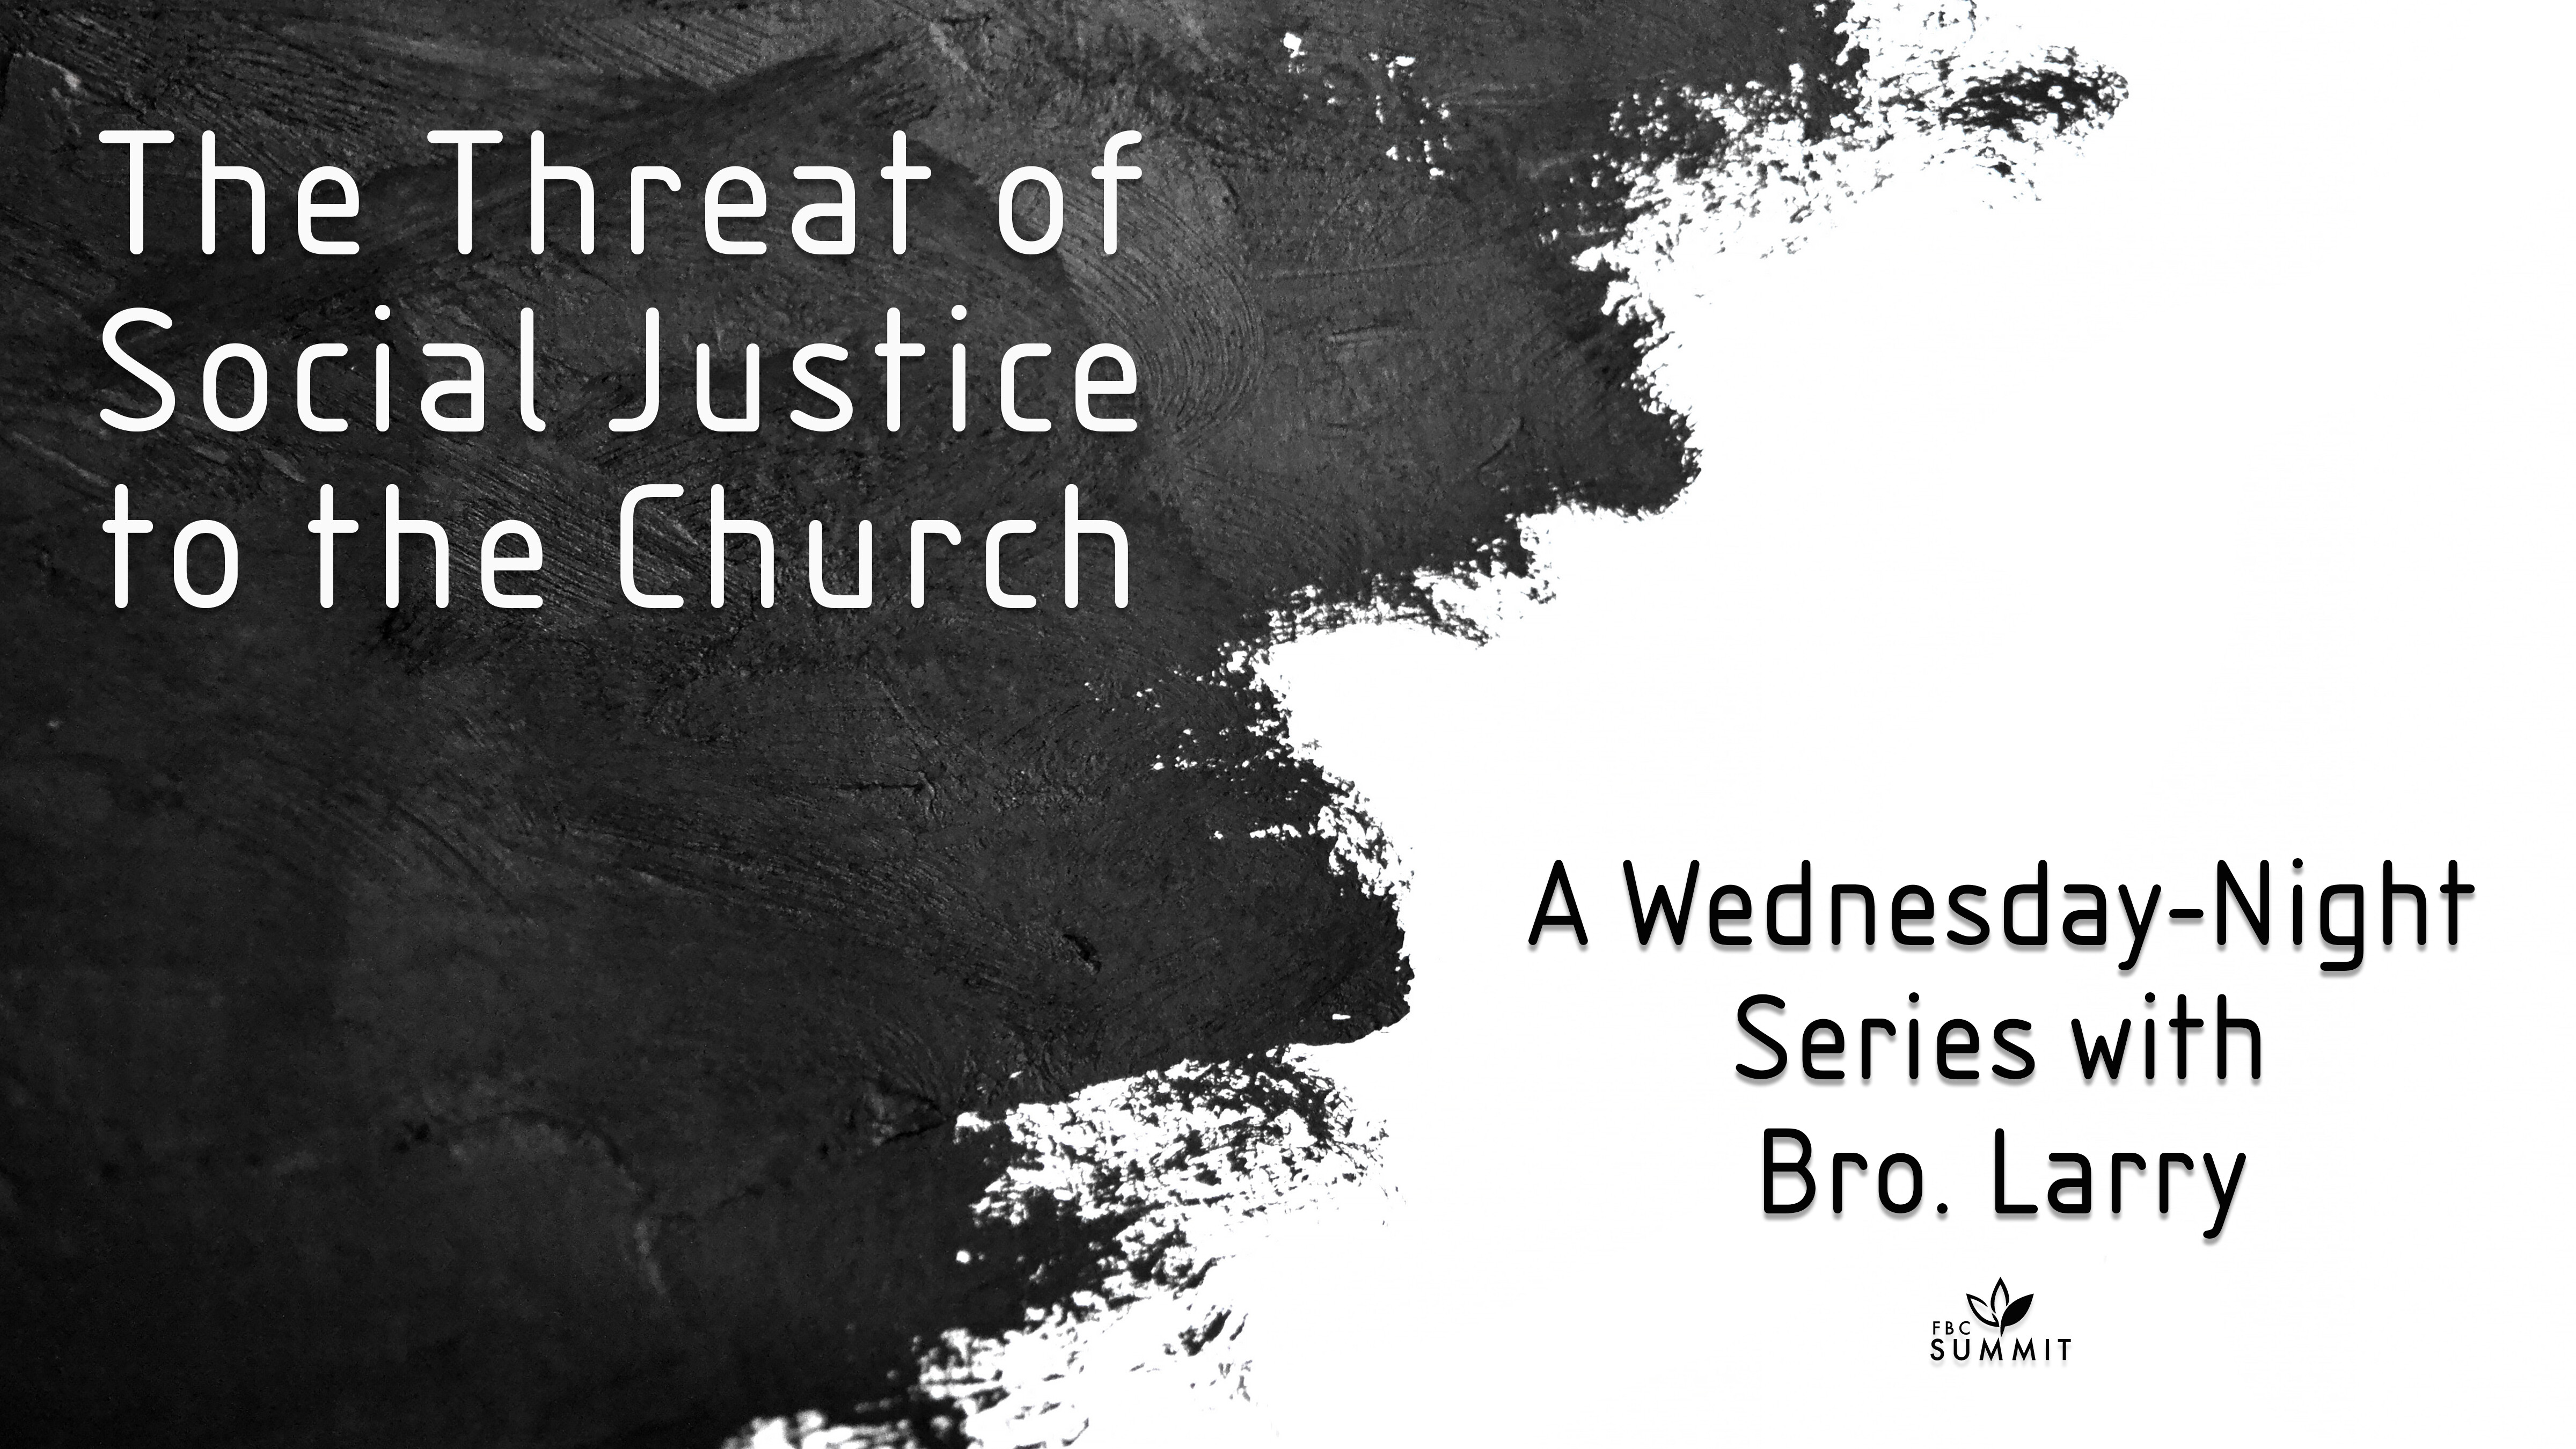 Wednesday Bible Study: "The Threat of Social Justice to the Church Part III"